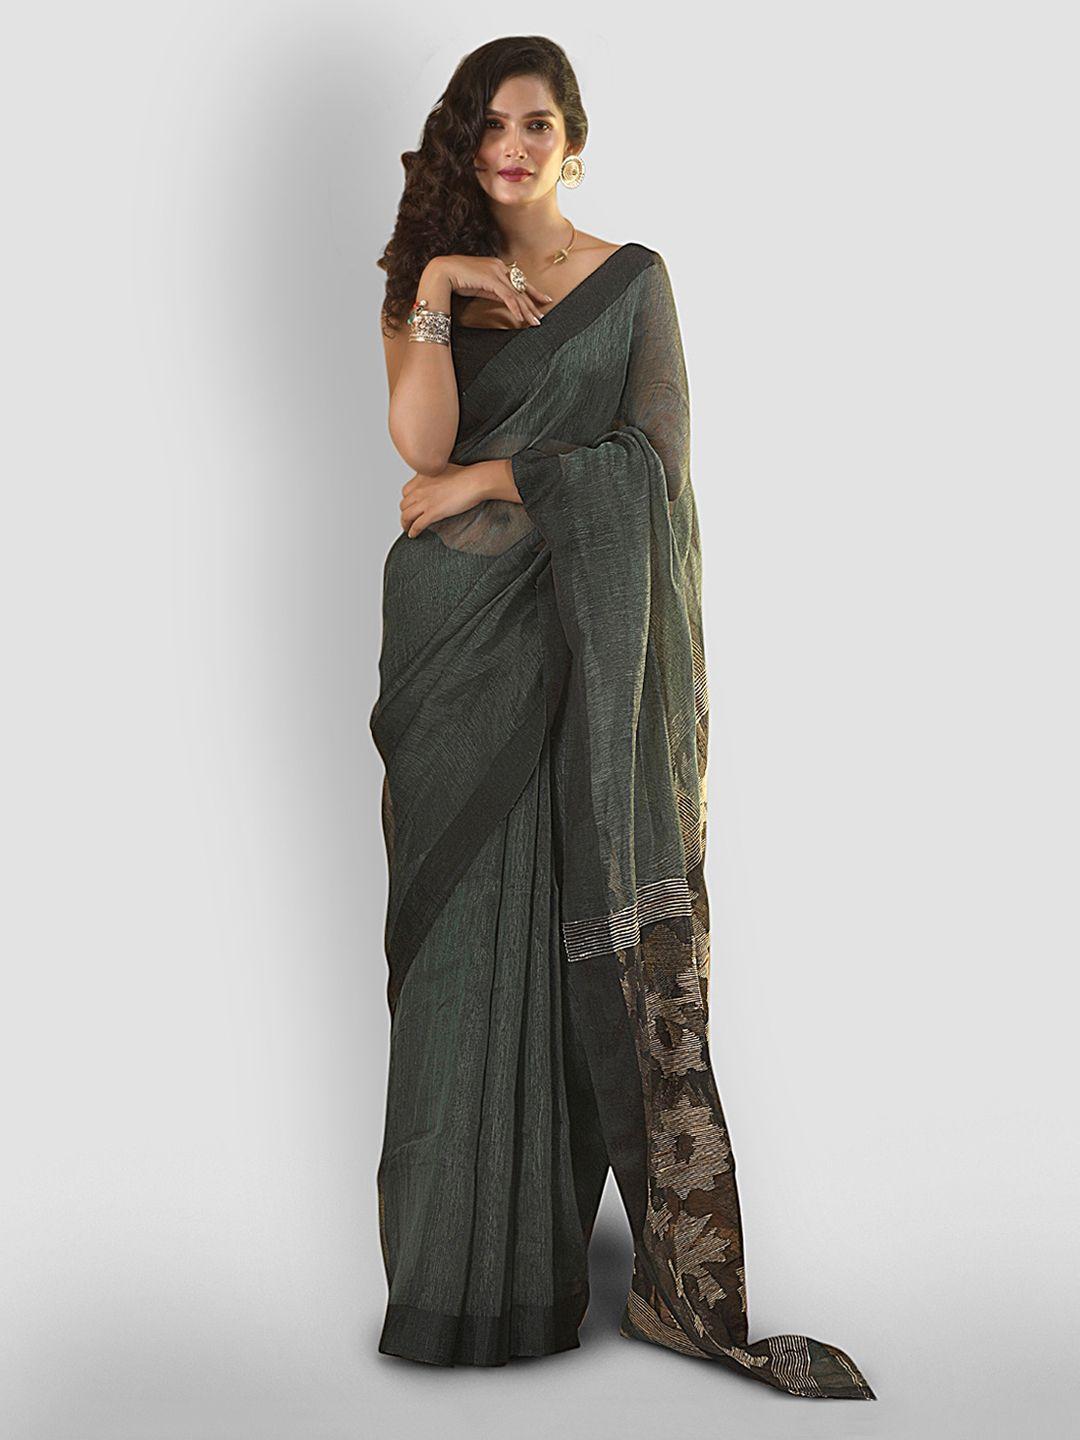 aryavart floral pure linen saree with blouse piece